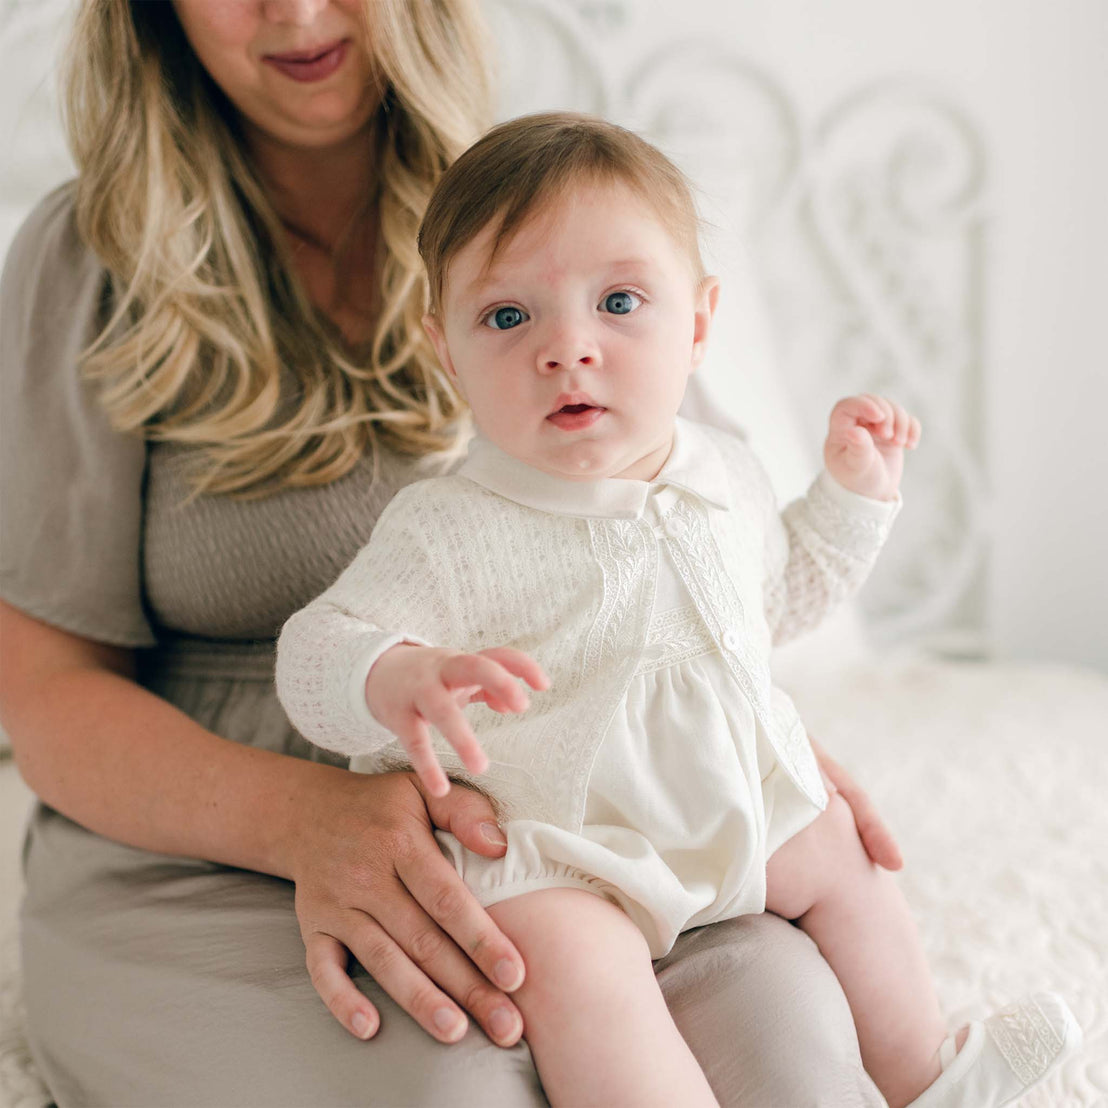 An adult with long blond hair seated behind a baby wearing a white outfit. The baby, clad in an Oliver Knit Sweater adorned with delicate Venice lace trim, has curious blue eyes and is reaching out with one hand while the adult supports the baby with one hand on the baby's knee. They are sitting in a light-colored room.